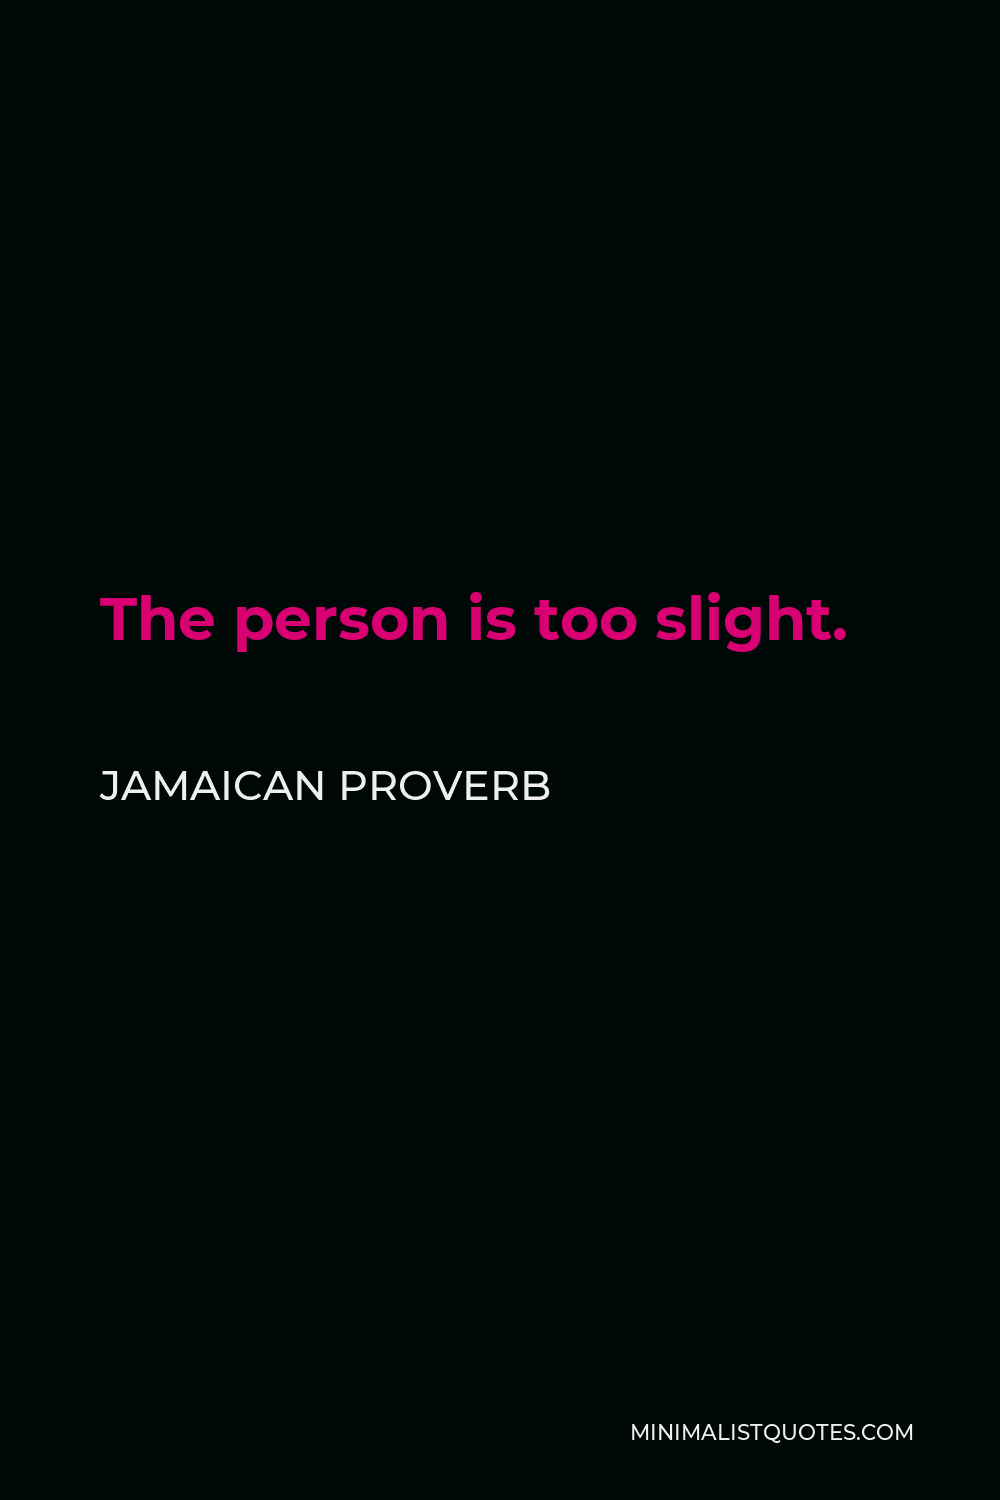 Jamaican Proverb Quote - The person is too slight.